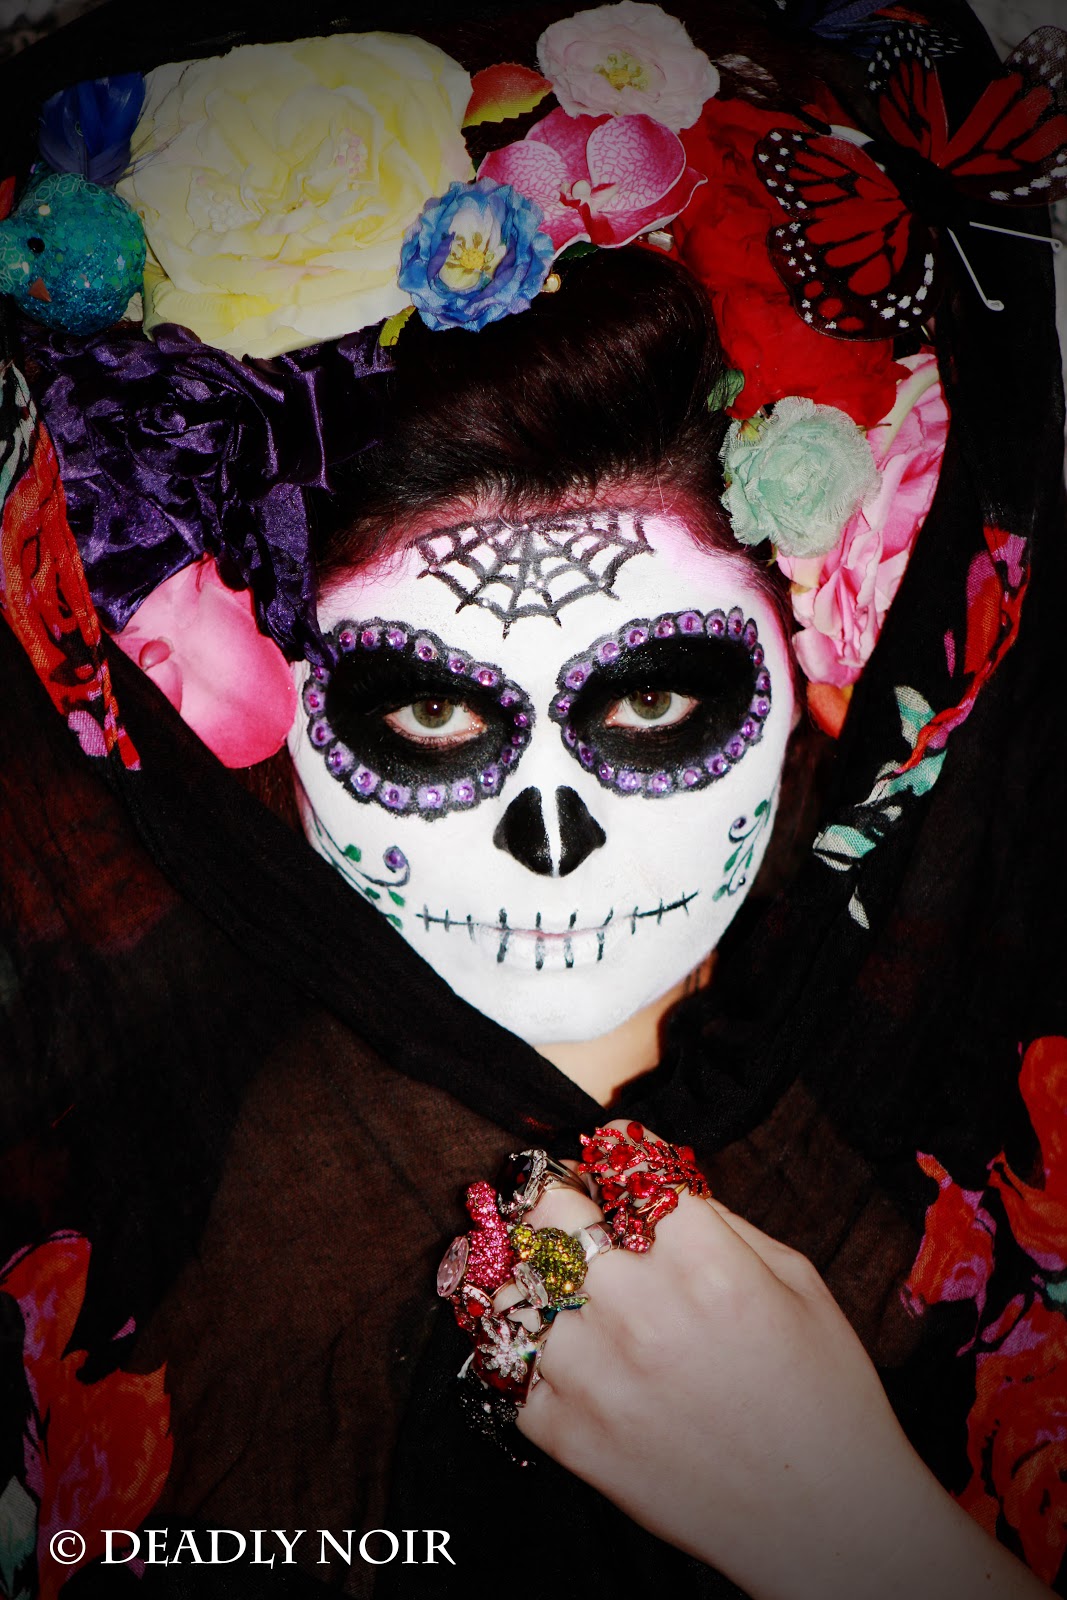 Deadly is the Female: Celebrate Halloween & Dia de los Muertos with Deadly!